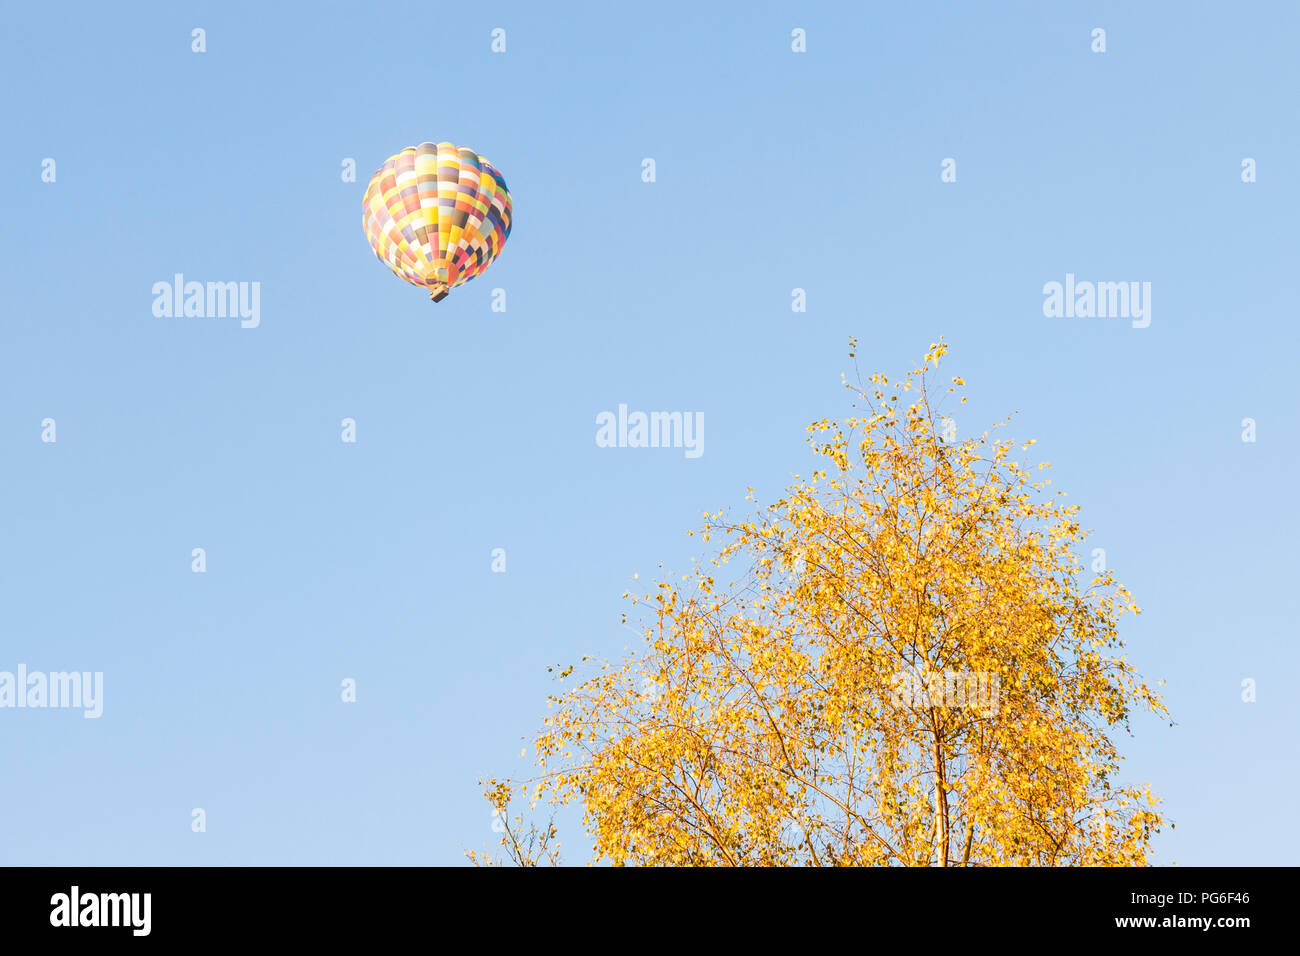 Hot air ballooning in a blue sky. Hot air balloon floating above a tree in Autumn, Derbyshire, England, UK Stock Photo